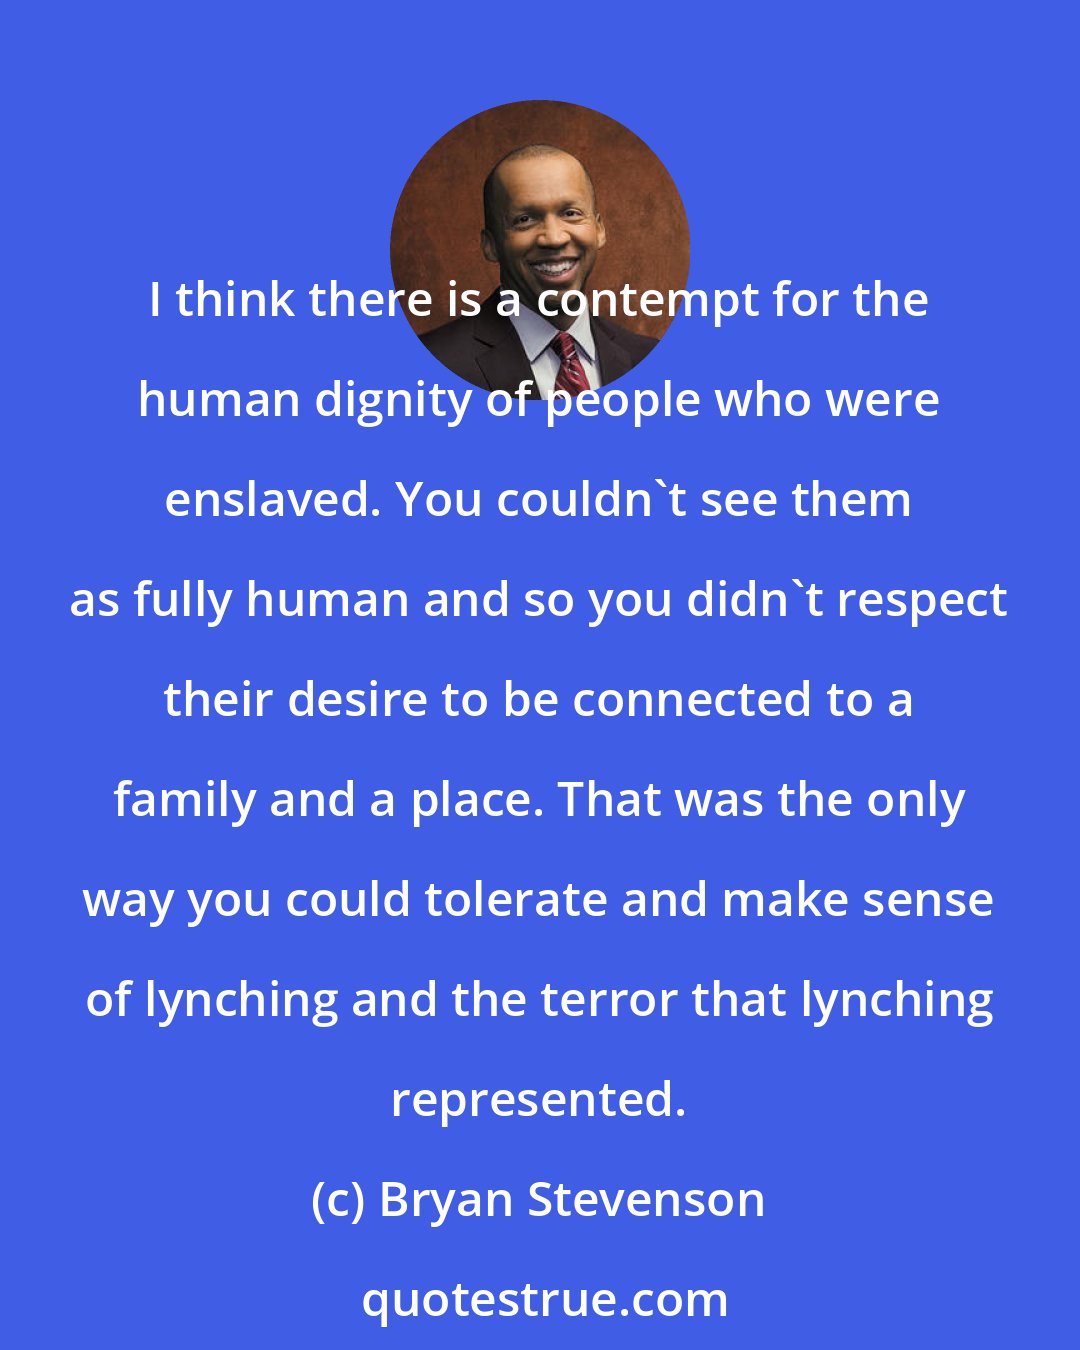 Bryan Stevenson: I think there is a contempt for the human dignity of people who were enslaved. You couldn't see them as fully human and so you didn't respect their desire to be connected to a family and a place. That was the only way you could tolerate and make sense of lynching and the terror that lynching represented.